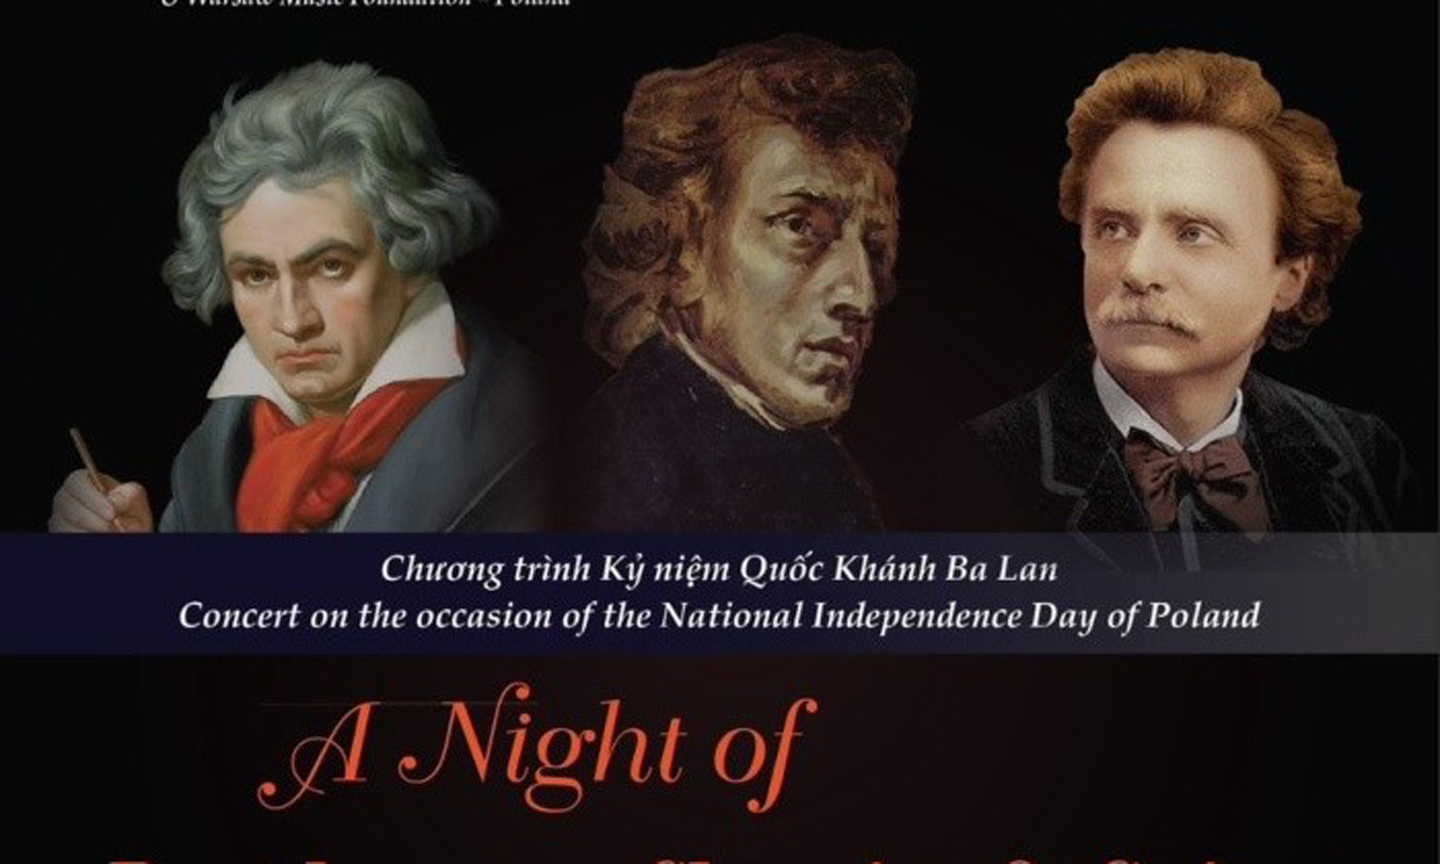 Concert to honour three celebrated composers Beethoven, Chopin and Grieg.